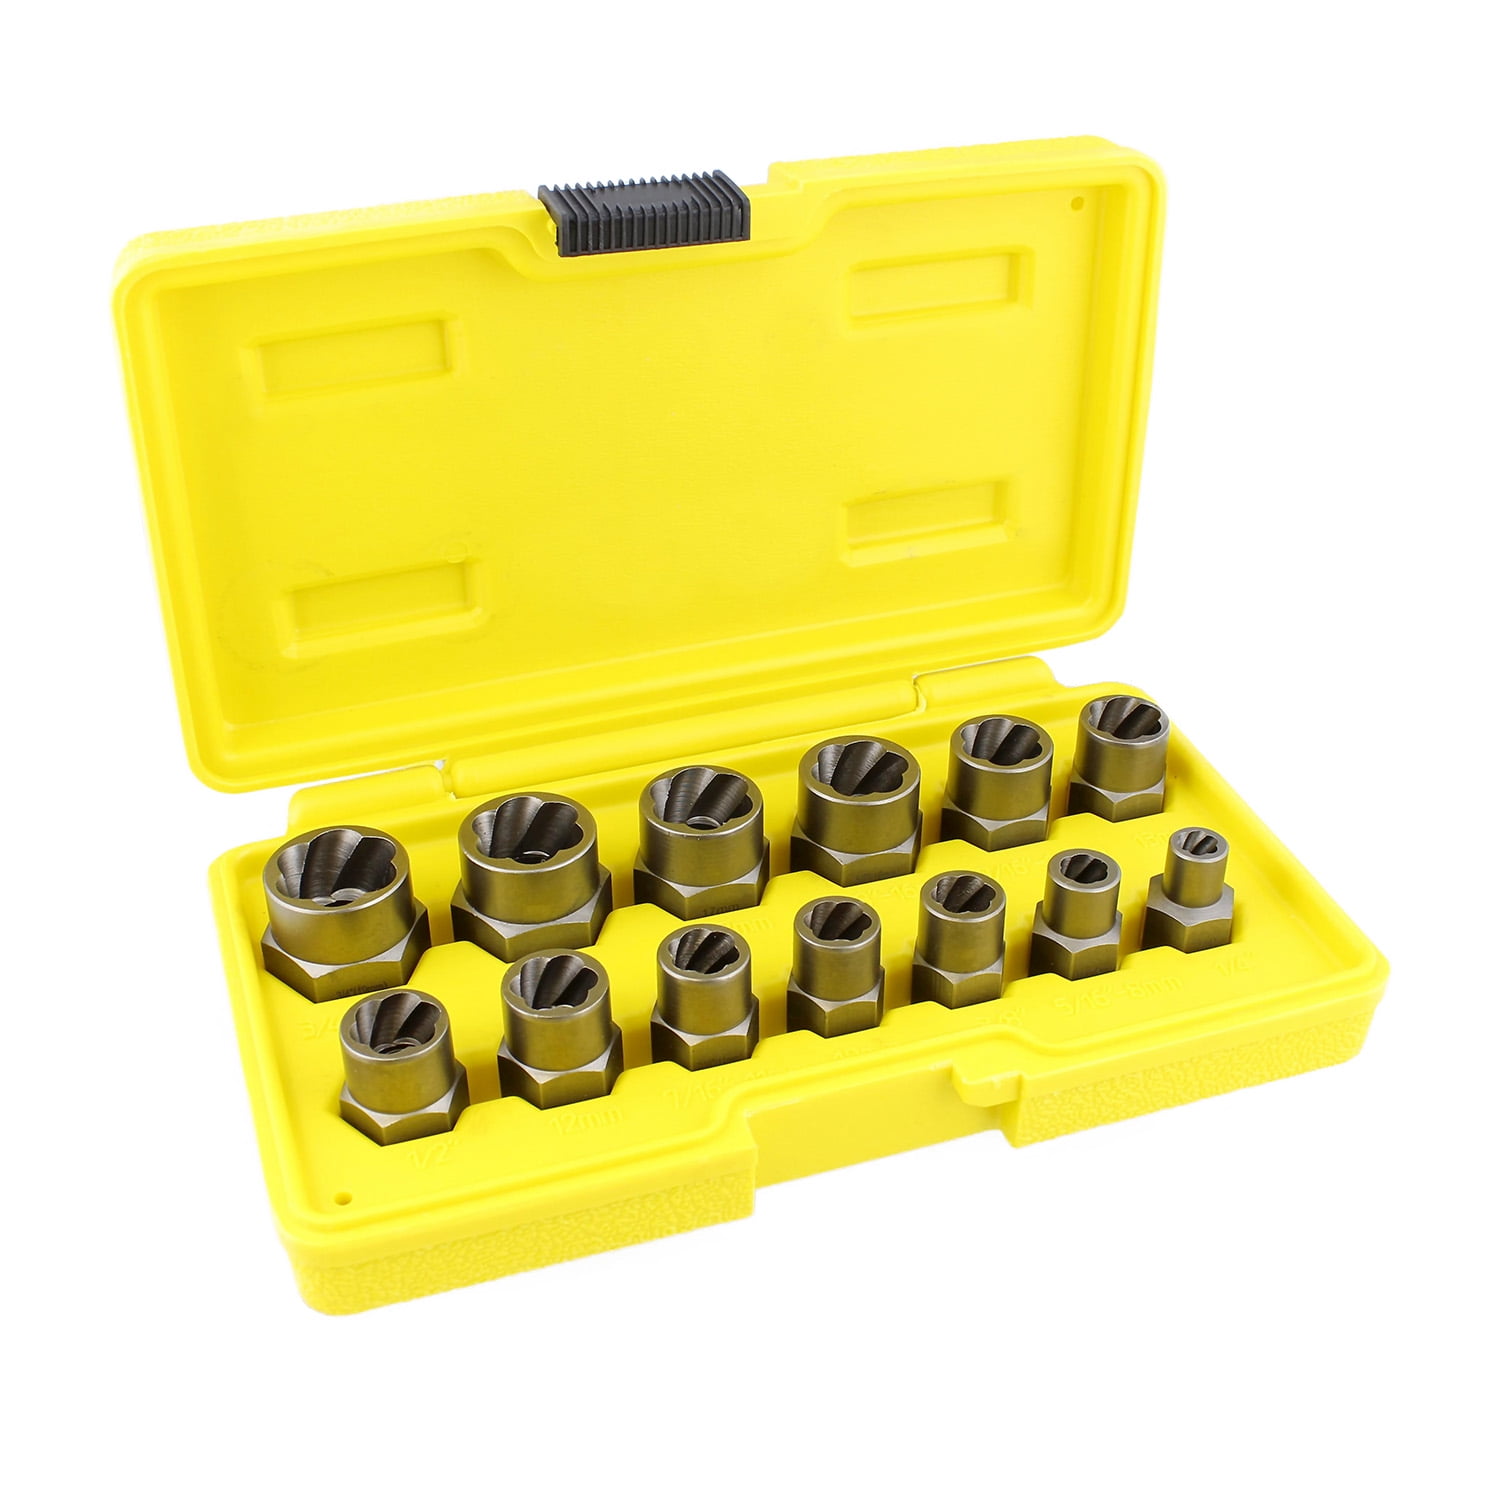 Nut Bolt Extractor Socket Set in 13 SAE and Metric Sizes for 3/8 Inch Drive with Case Impact Nut and Bolt Extraction Tool Set Rusted Damaged Stripped Nut and Bolt Remover Tool Kit 